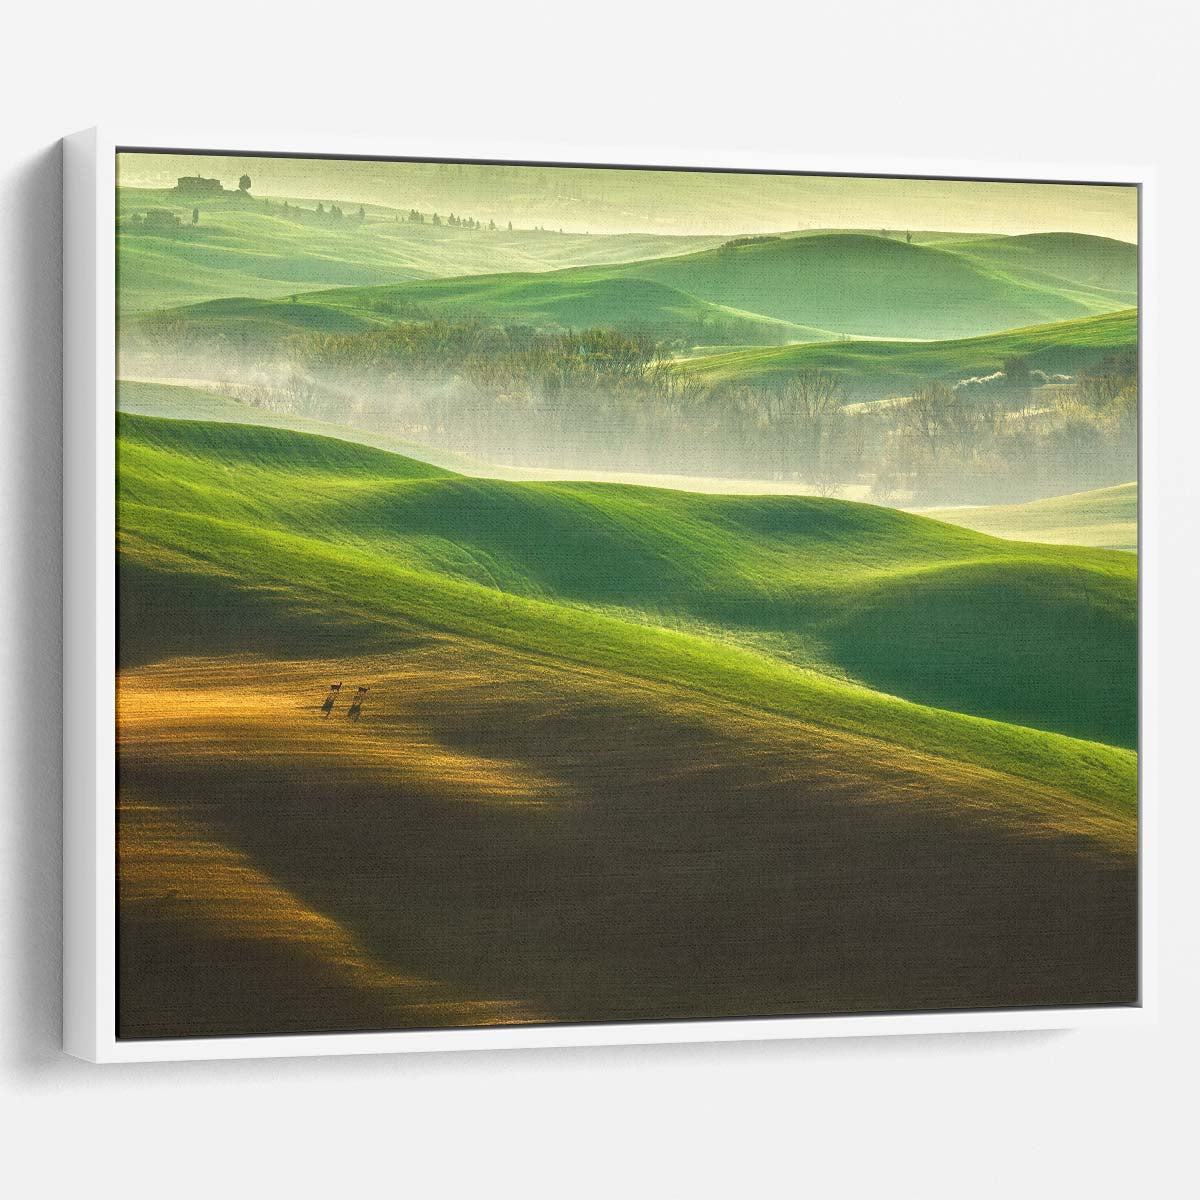 Tuscan Sunrise Misty Fields & Cypress Trees Wall Art by Luxuriance Designs. Made in USA.